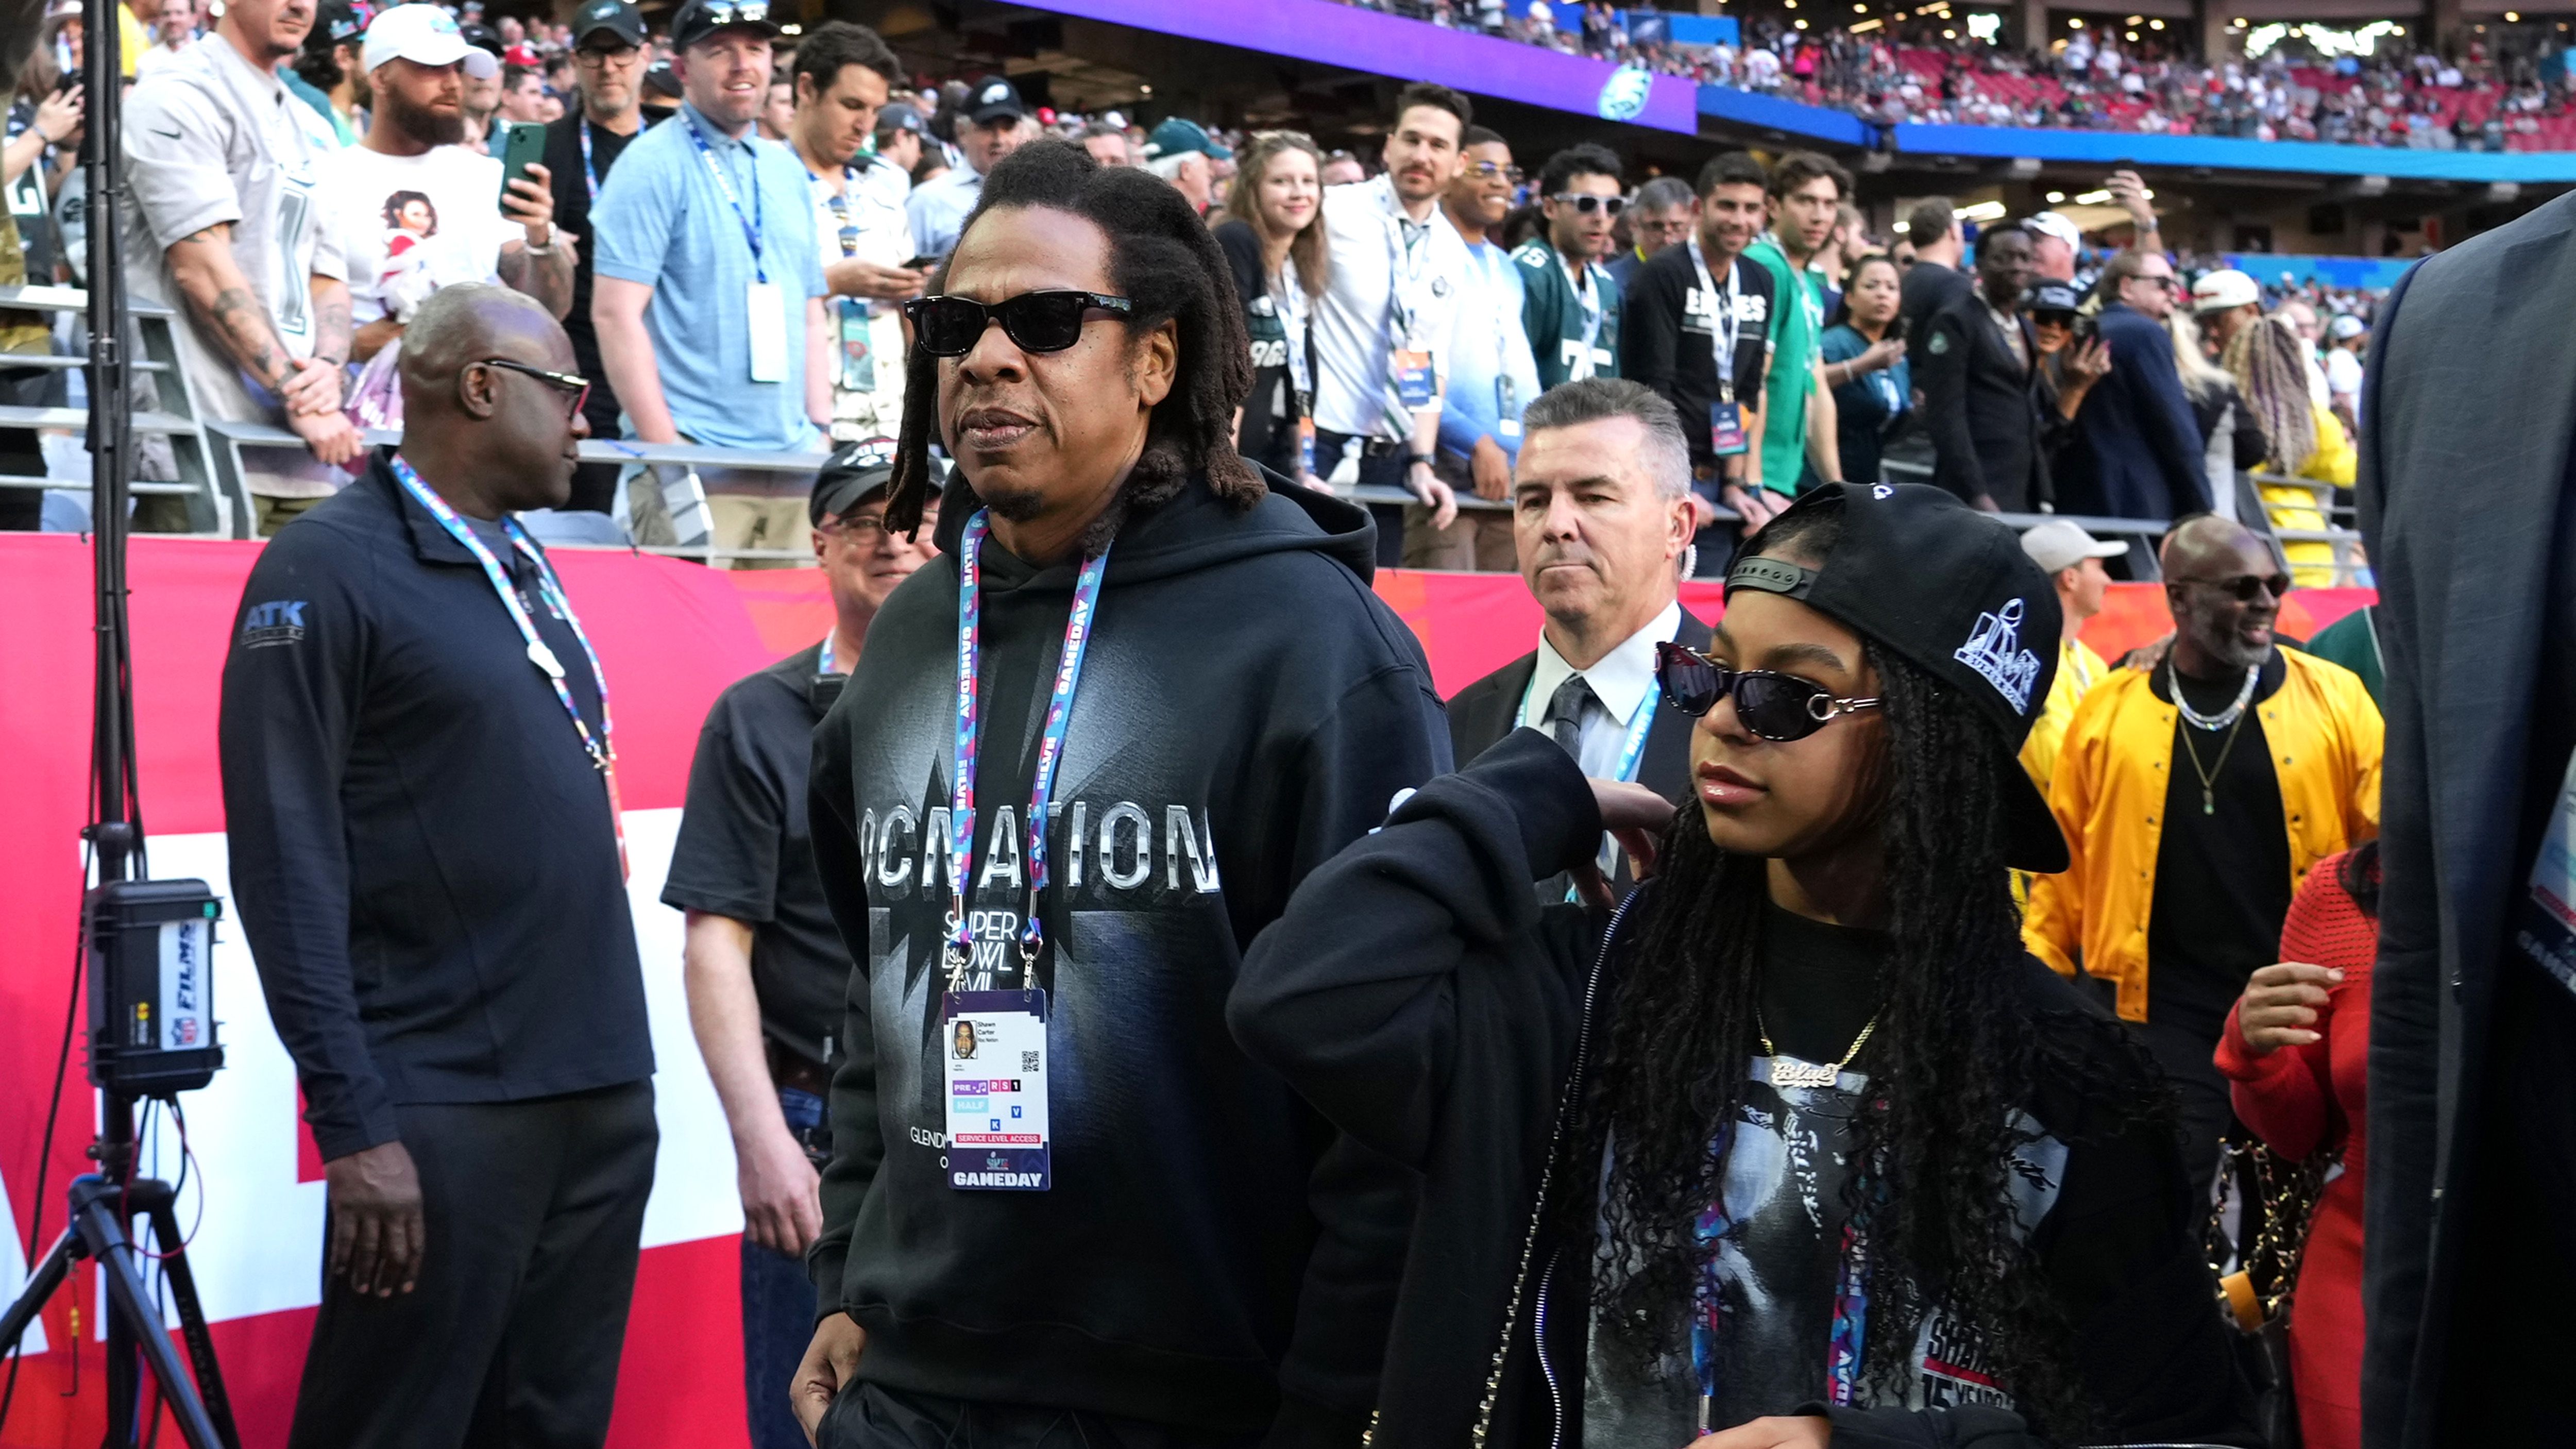 Jay Z and Blue Ivy's Daddy-Daughter Style